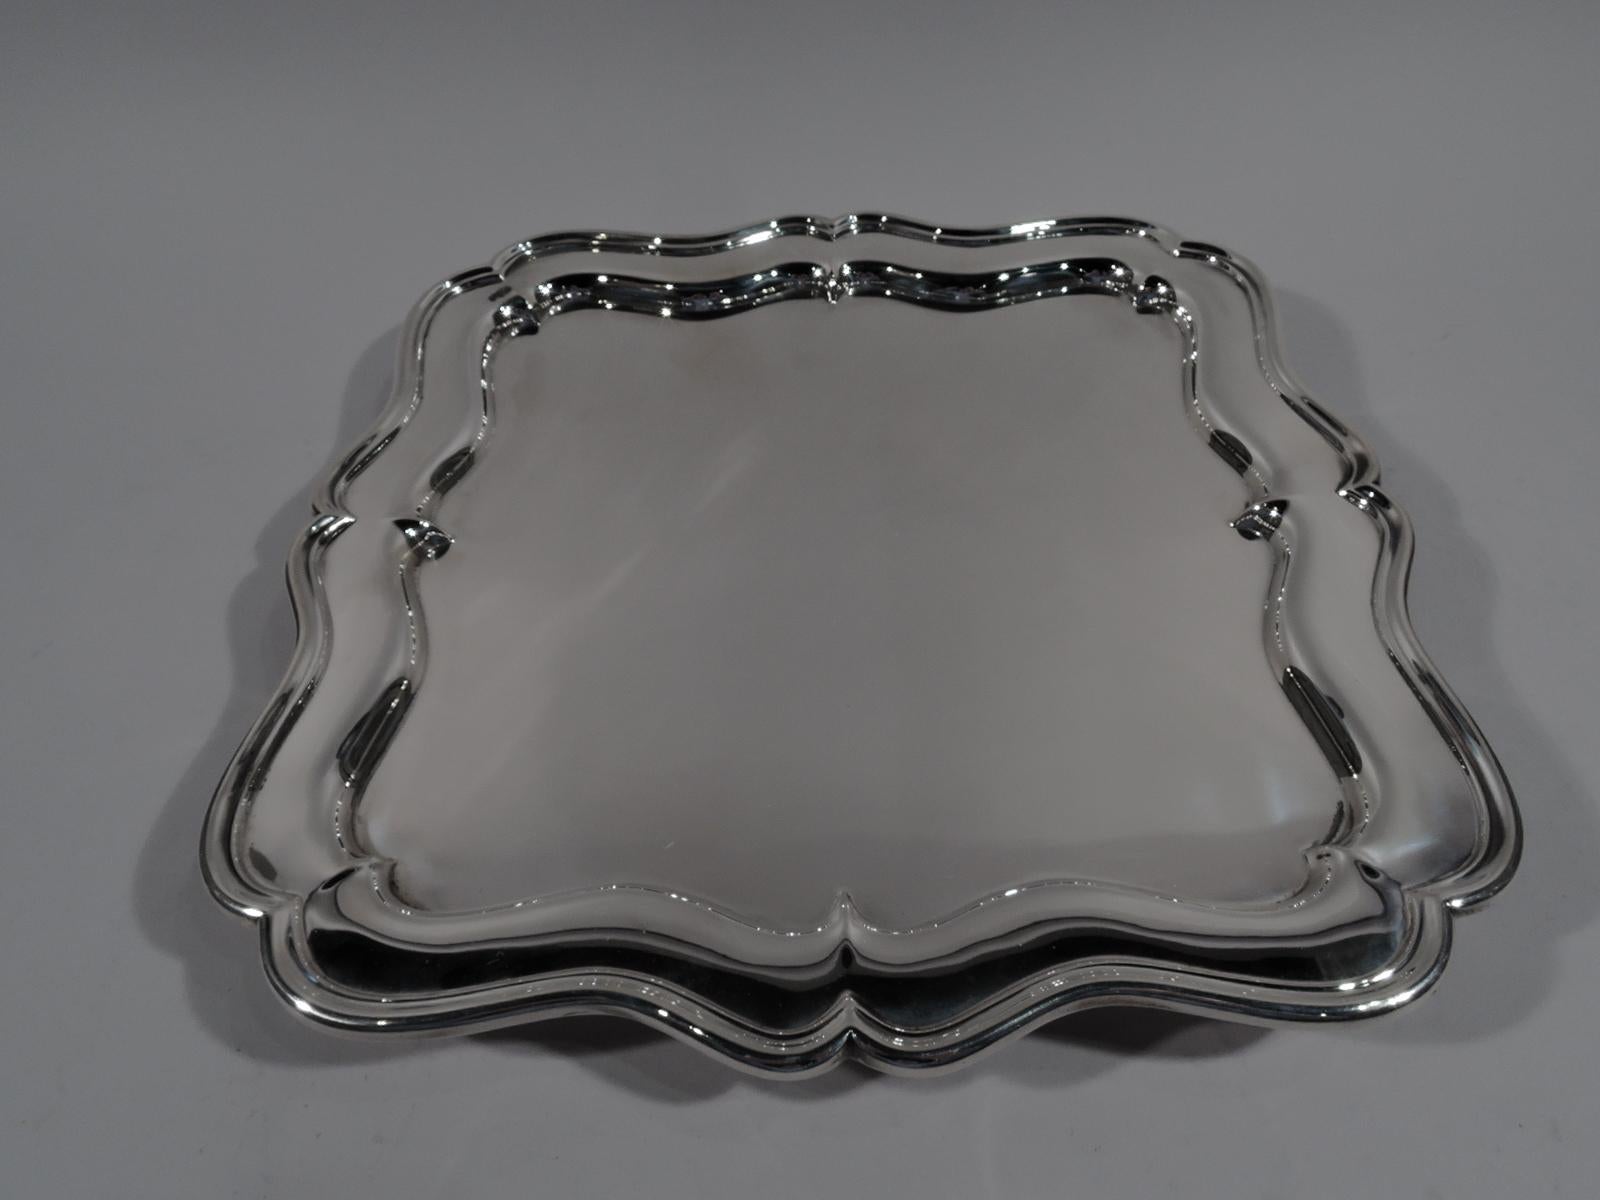 George V sterling silver footed tray. Made by William Comyns in London in 1912. Four scrolled sides with well and molded rim. Corners double scroll as are corner supports. A fancy piece with nice heft. English marks and Cartier retailer’s stamp.